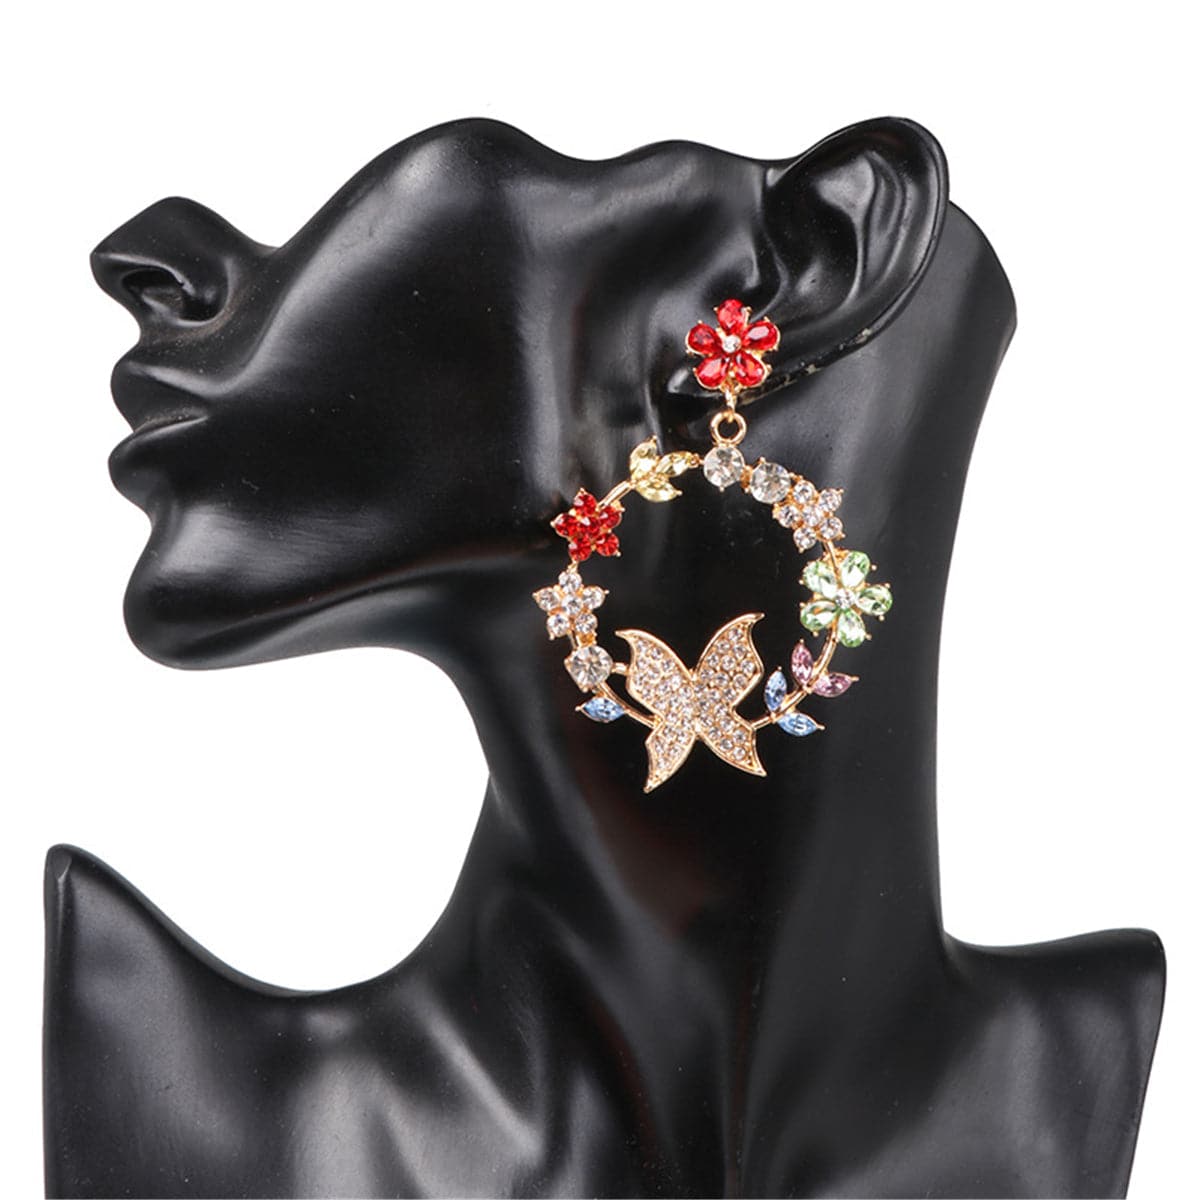 Red Crystal & Cubic Zirconia Floral Butterfly Drop Earrings